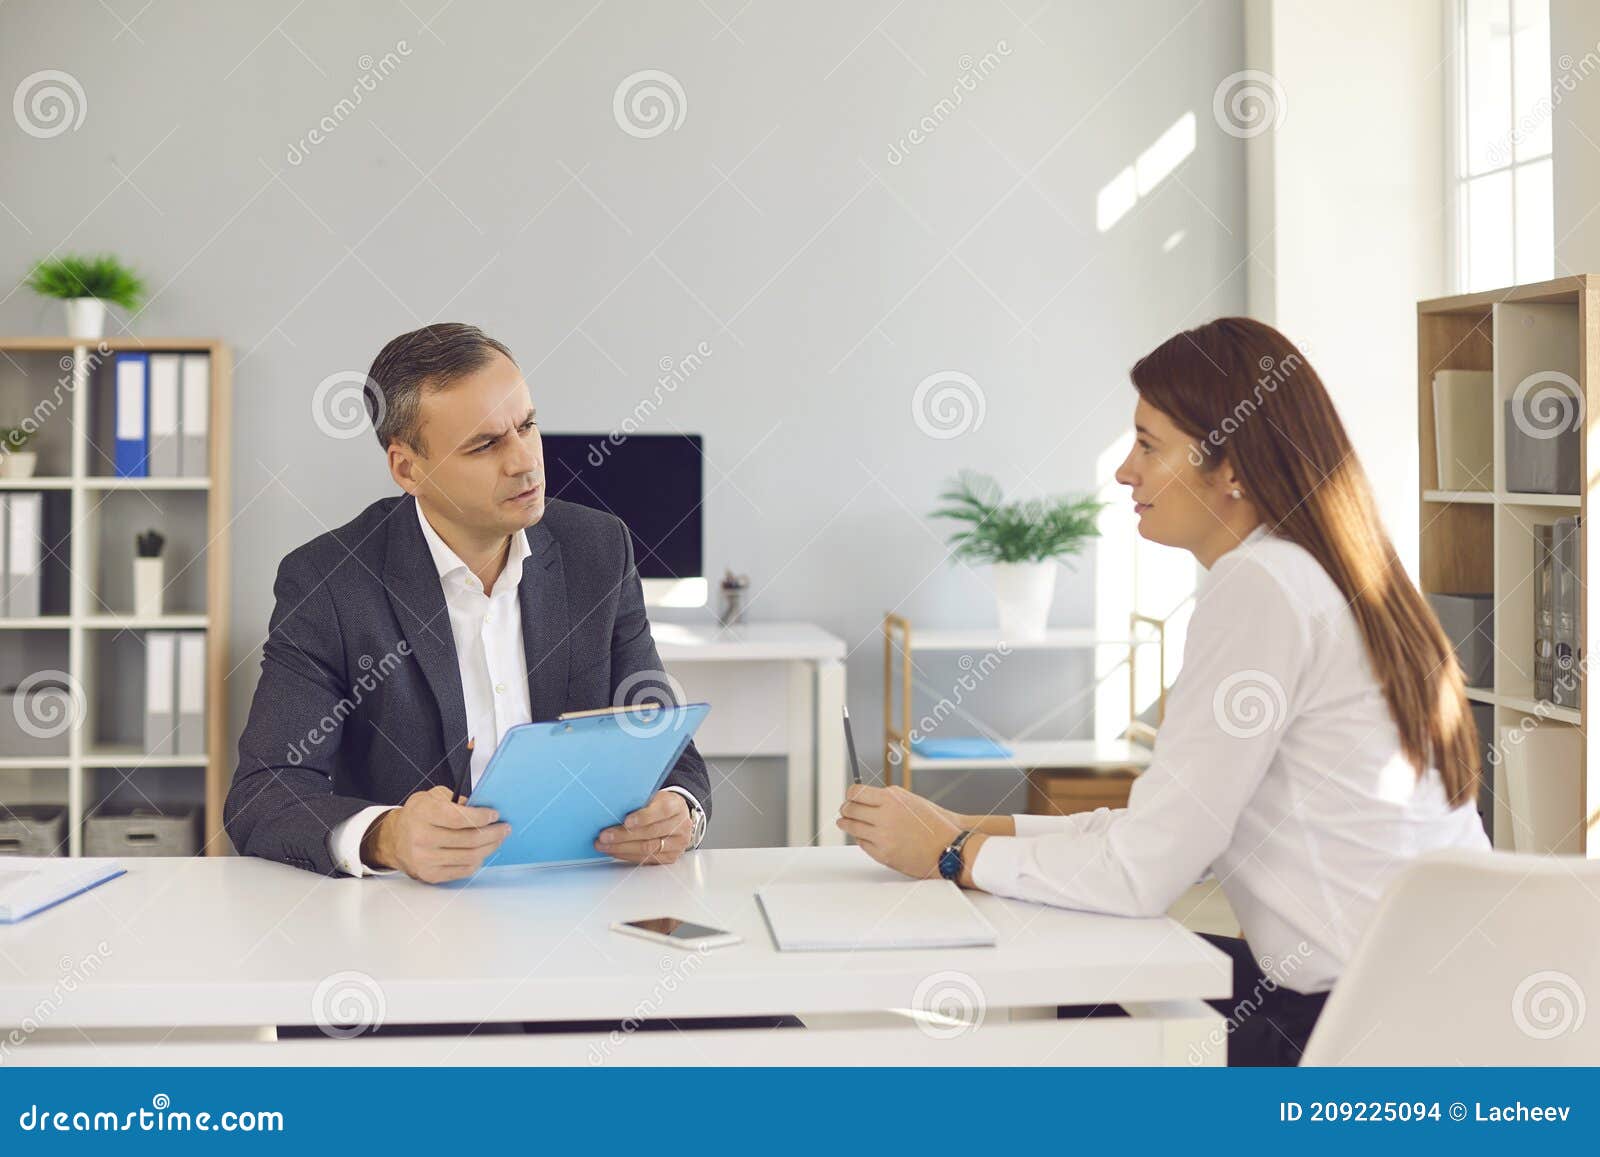 Serious HR Manager Listening To Candidate Telling about Her Work Experience  during Job Interview Stock Photo - Image of employment, advisor: 209225094